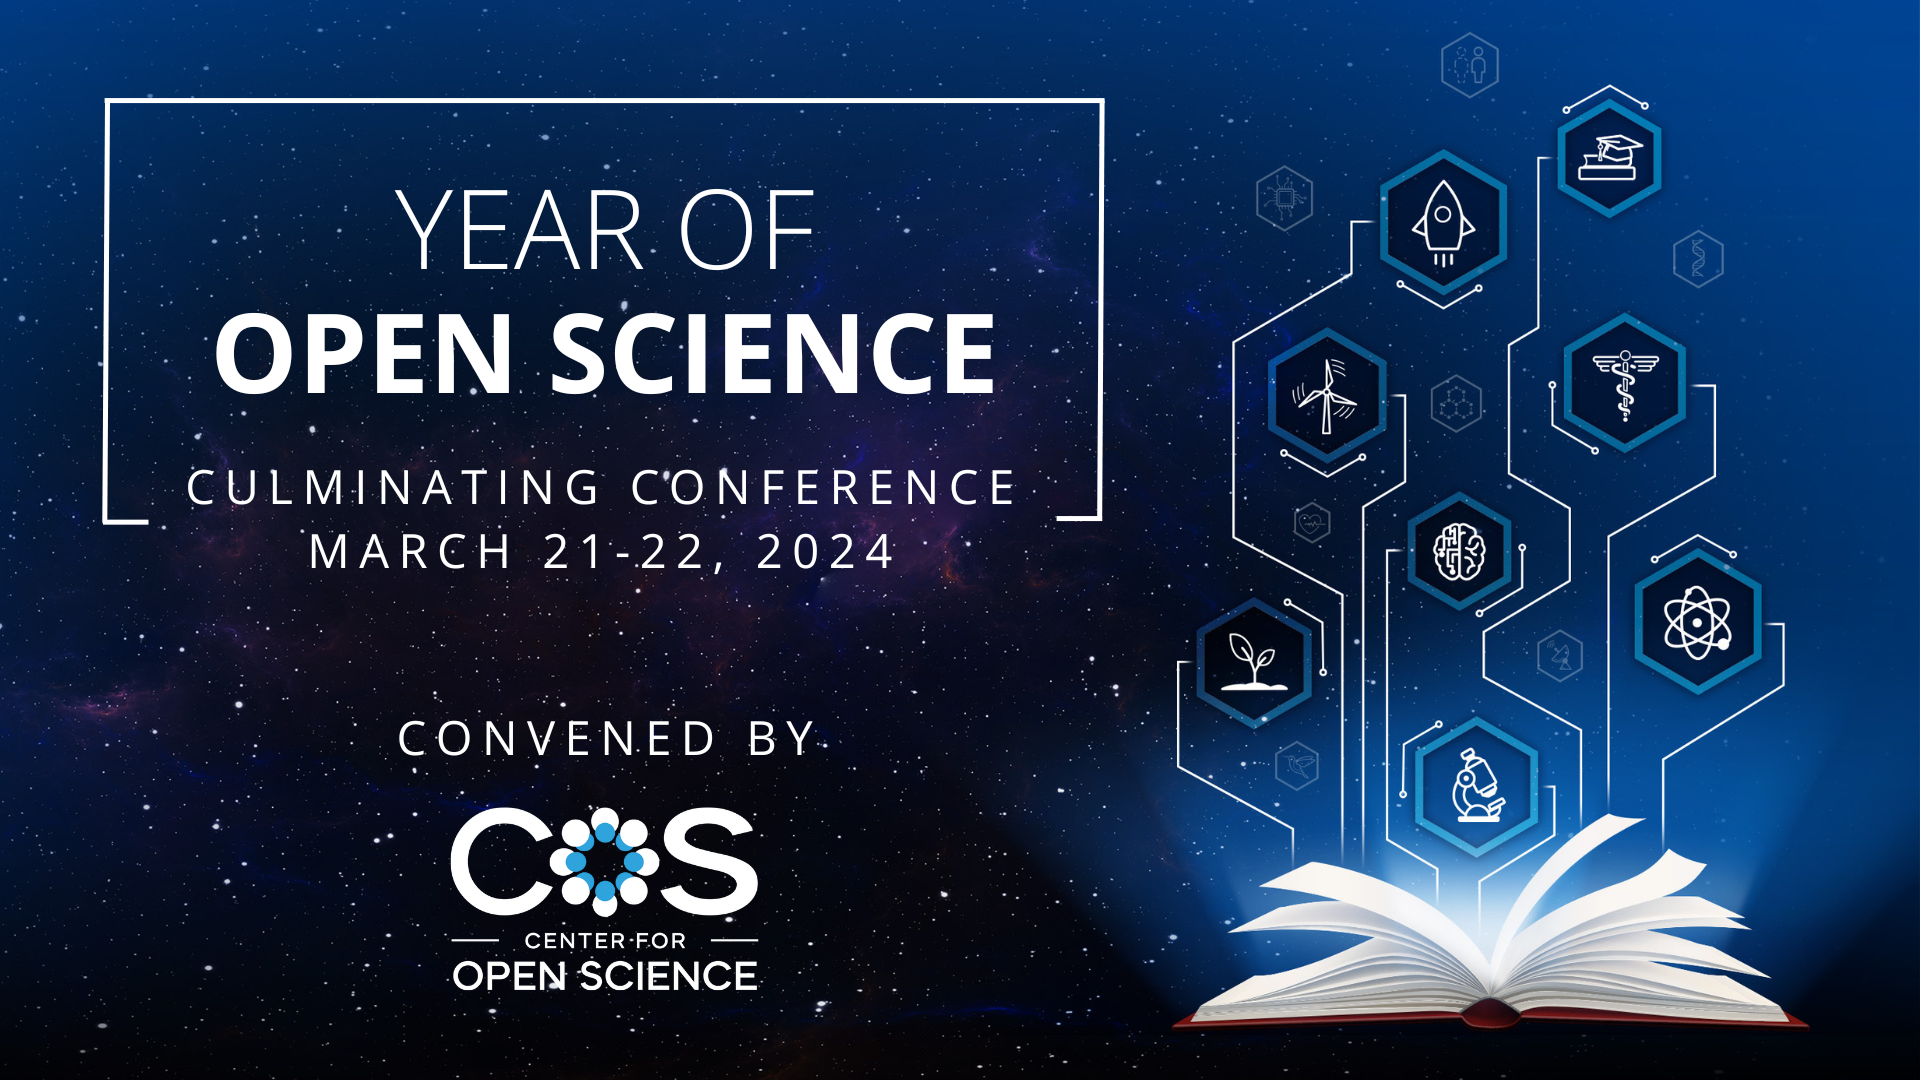 Image advertising the Year of Open Science culminating conference which is taking place from March 21-22, 2024